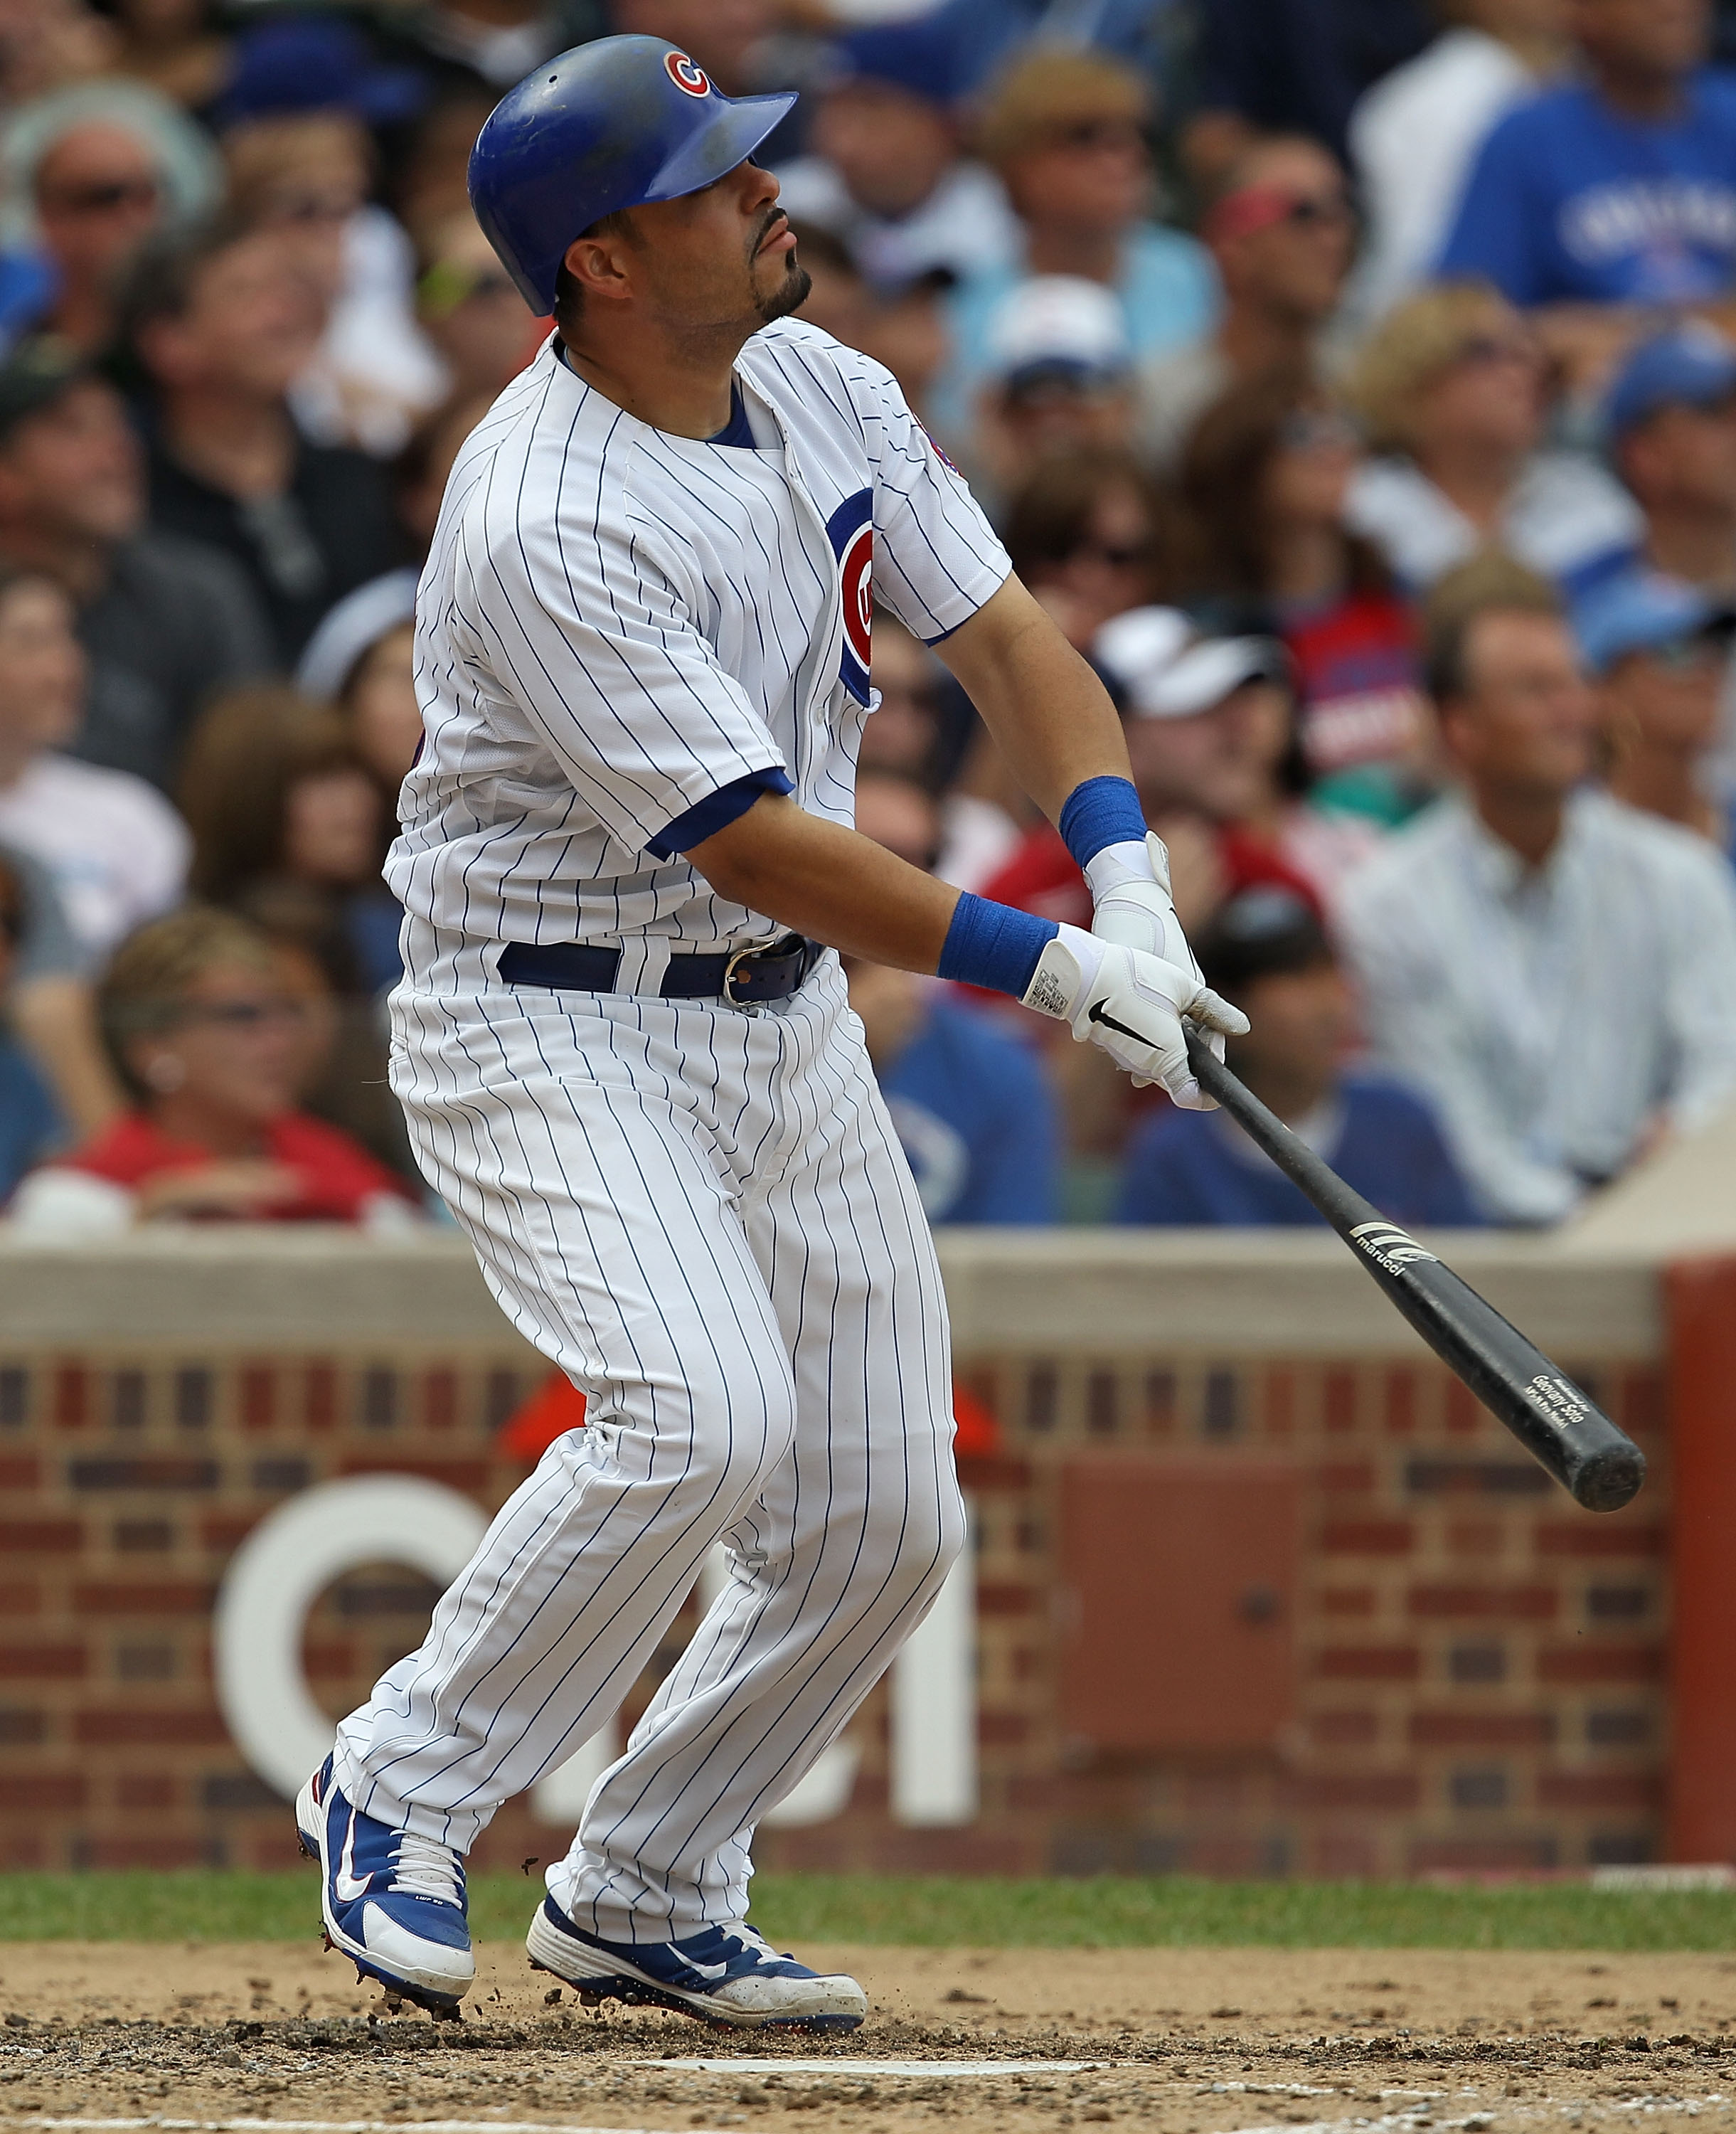 CHICAGO - SEPTEMBER 05: Geovany Soto #18 of the Chicago Cubs watches the flight of the ball against the New York Mets at Wrigley Field on September 5, 2010 in Chicago, Illinois. The Mets defeated the Cubs 18-5. (Photo by Jonathan Daniel/Getty Images)